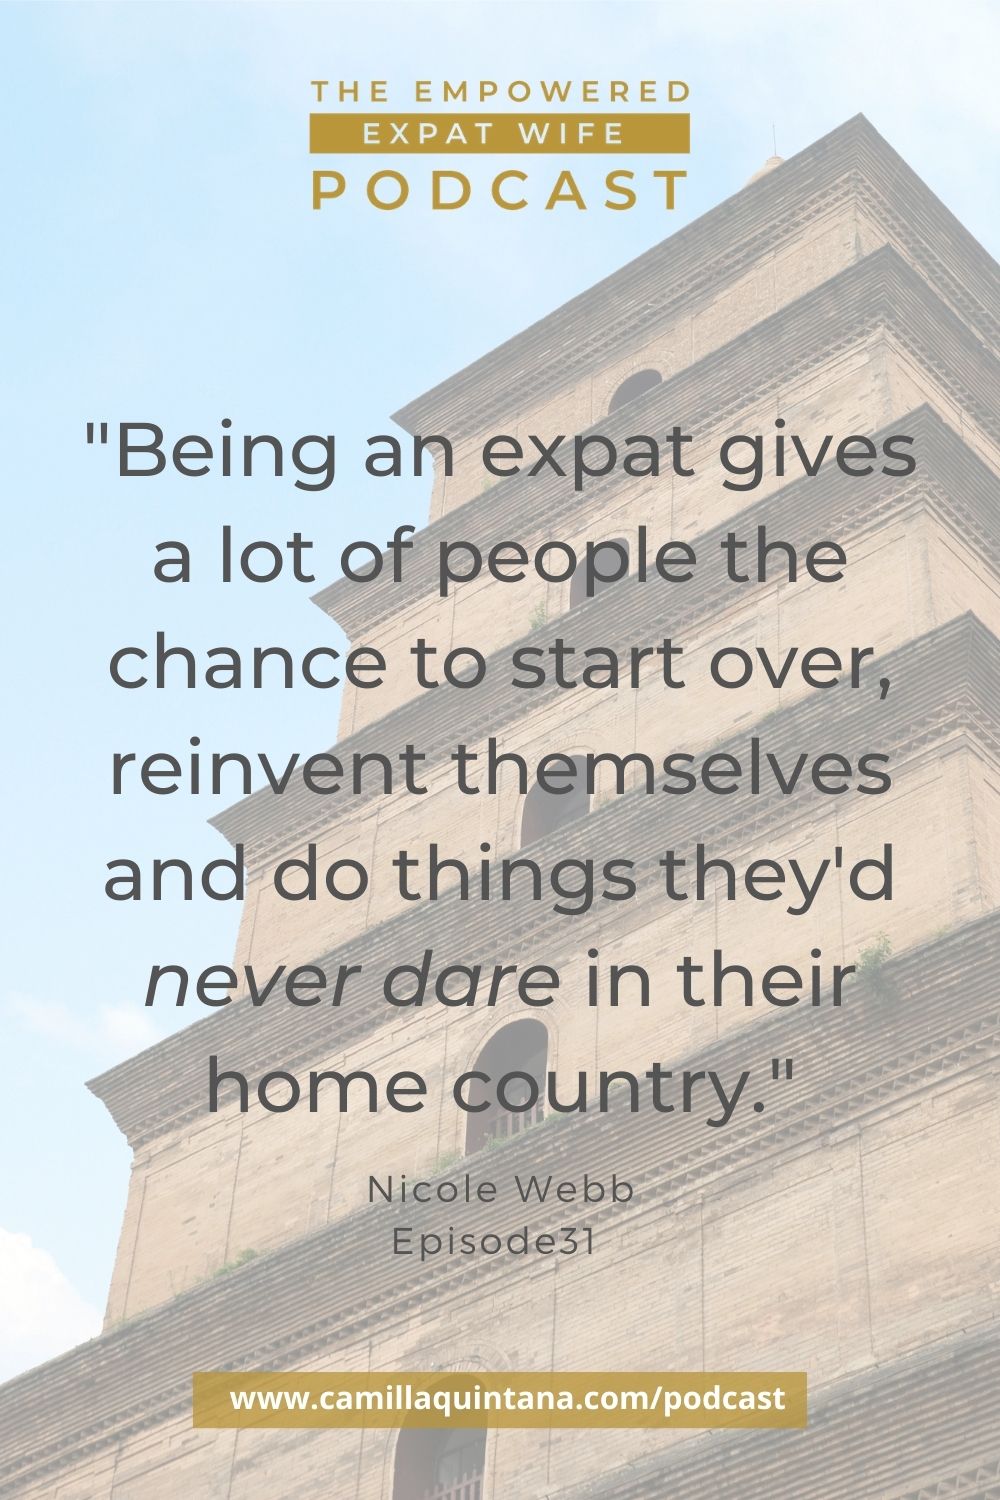 Nicole Webb, the empowered expat wife podcast